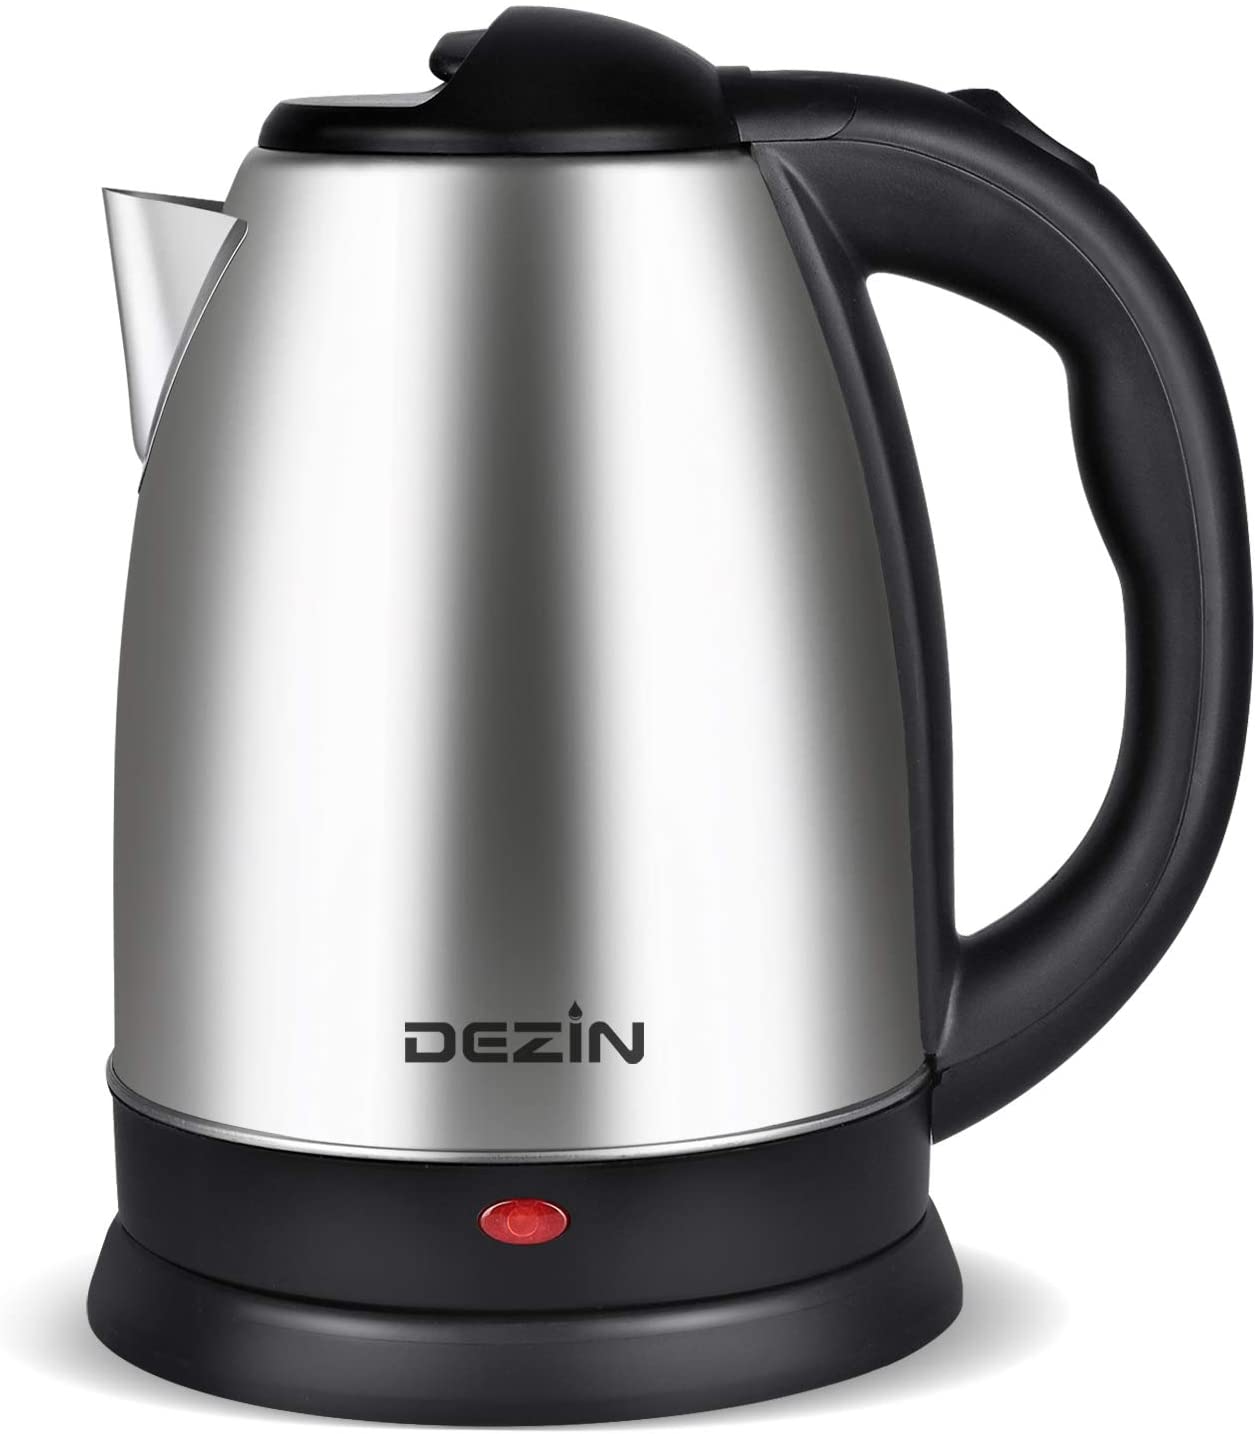 https://www.dontwasteyourmoney.com/wp-content/uploads/2020/04/dezin-stainless-steel-auto-shut-off-cordless-electric-kettle-electric-kettle-for-coffee.jpg